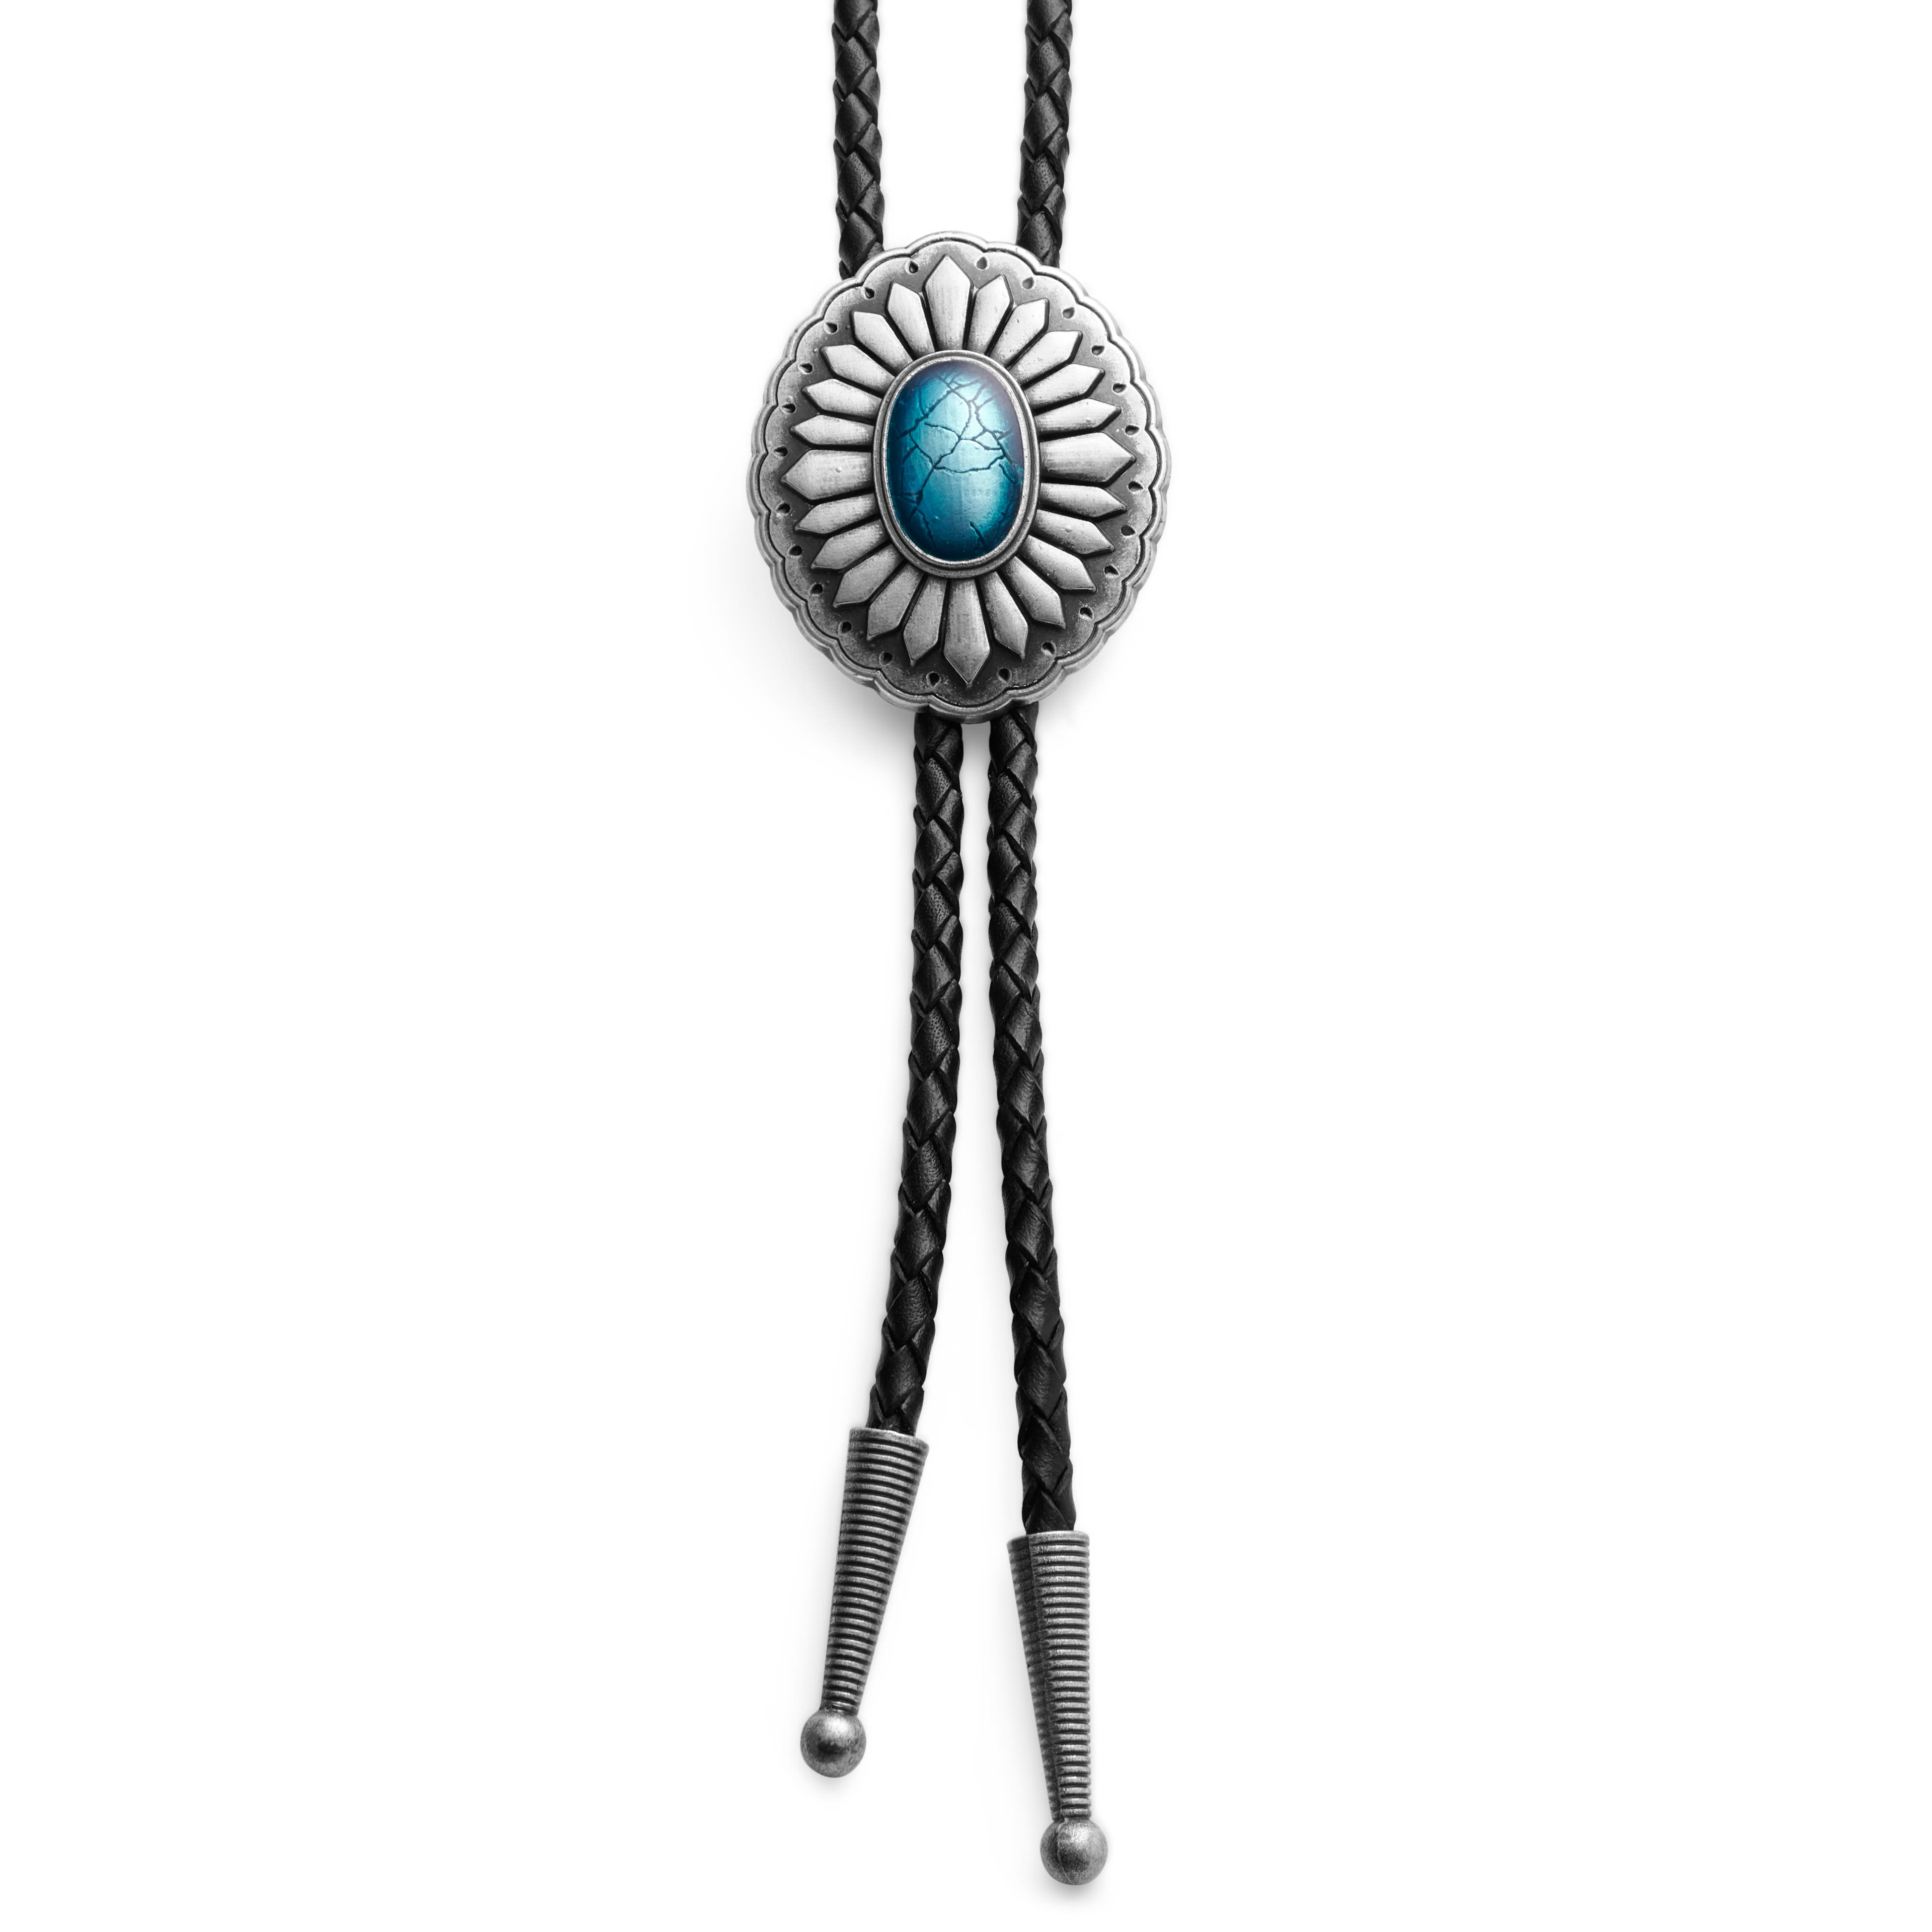 Turquoise Stone & Metal Adjustable Braided Leather Bolo Tie